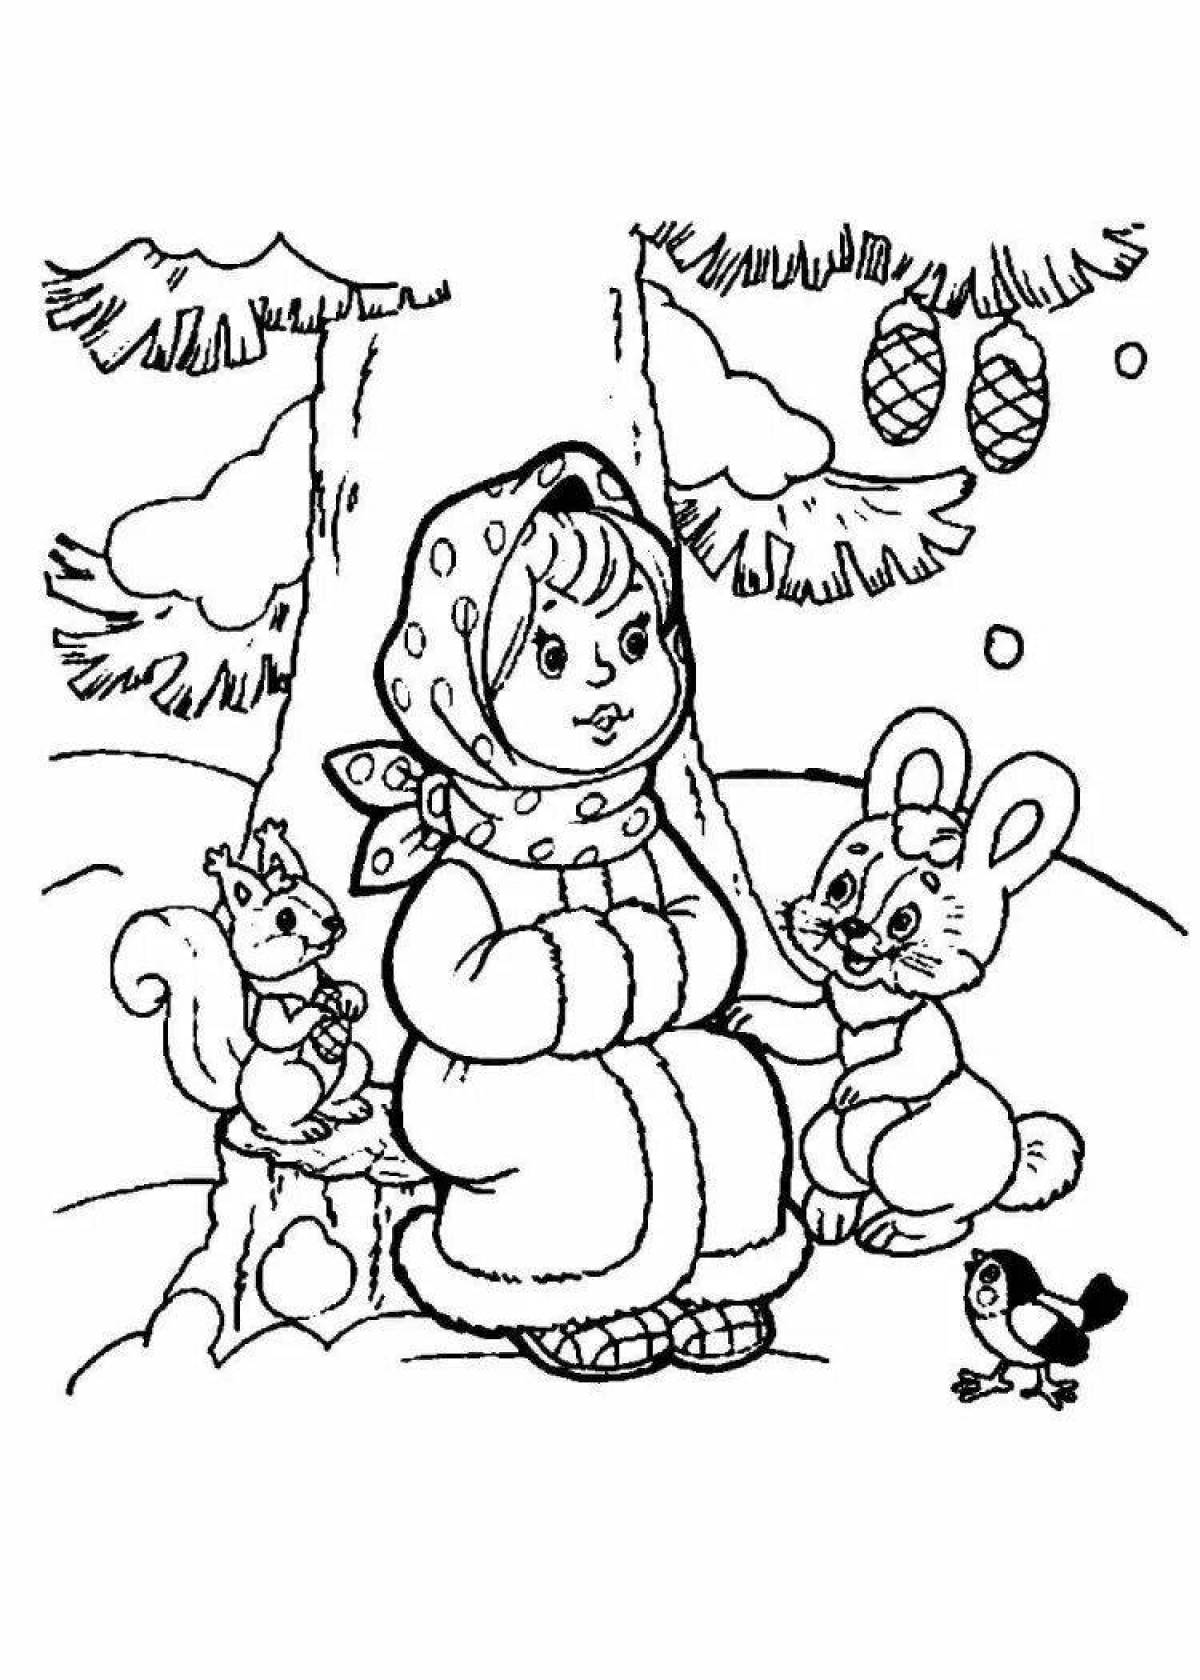 Charming coloring book based on Morozko's fairy tale